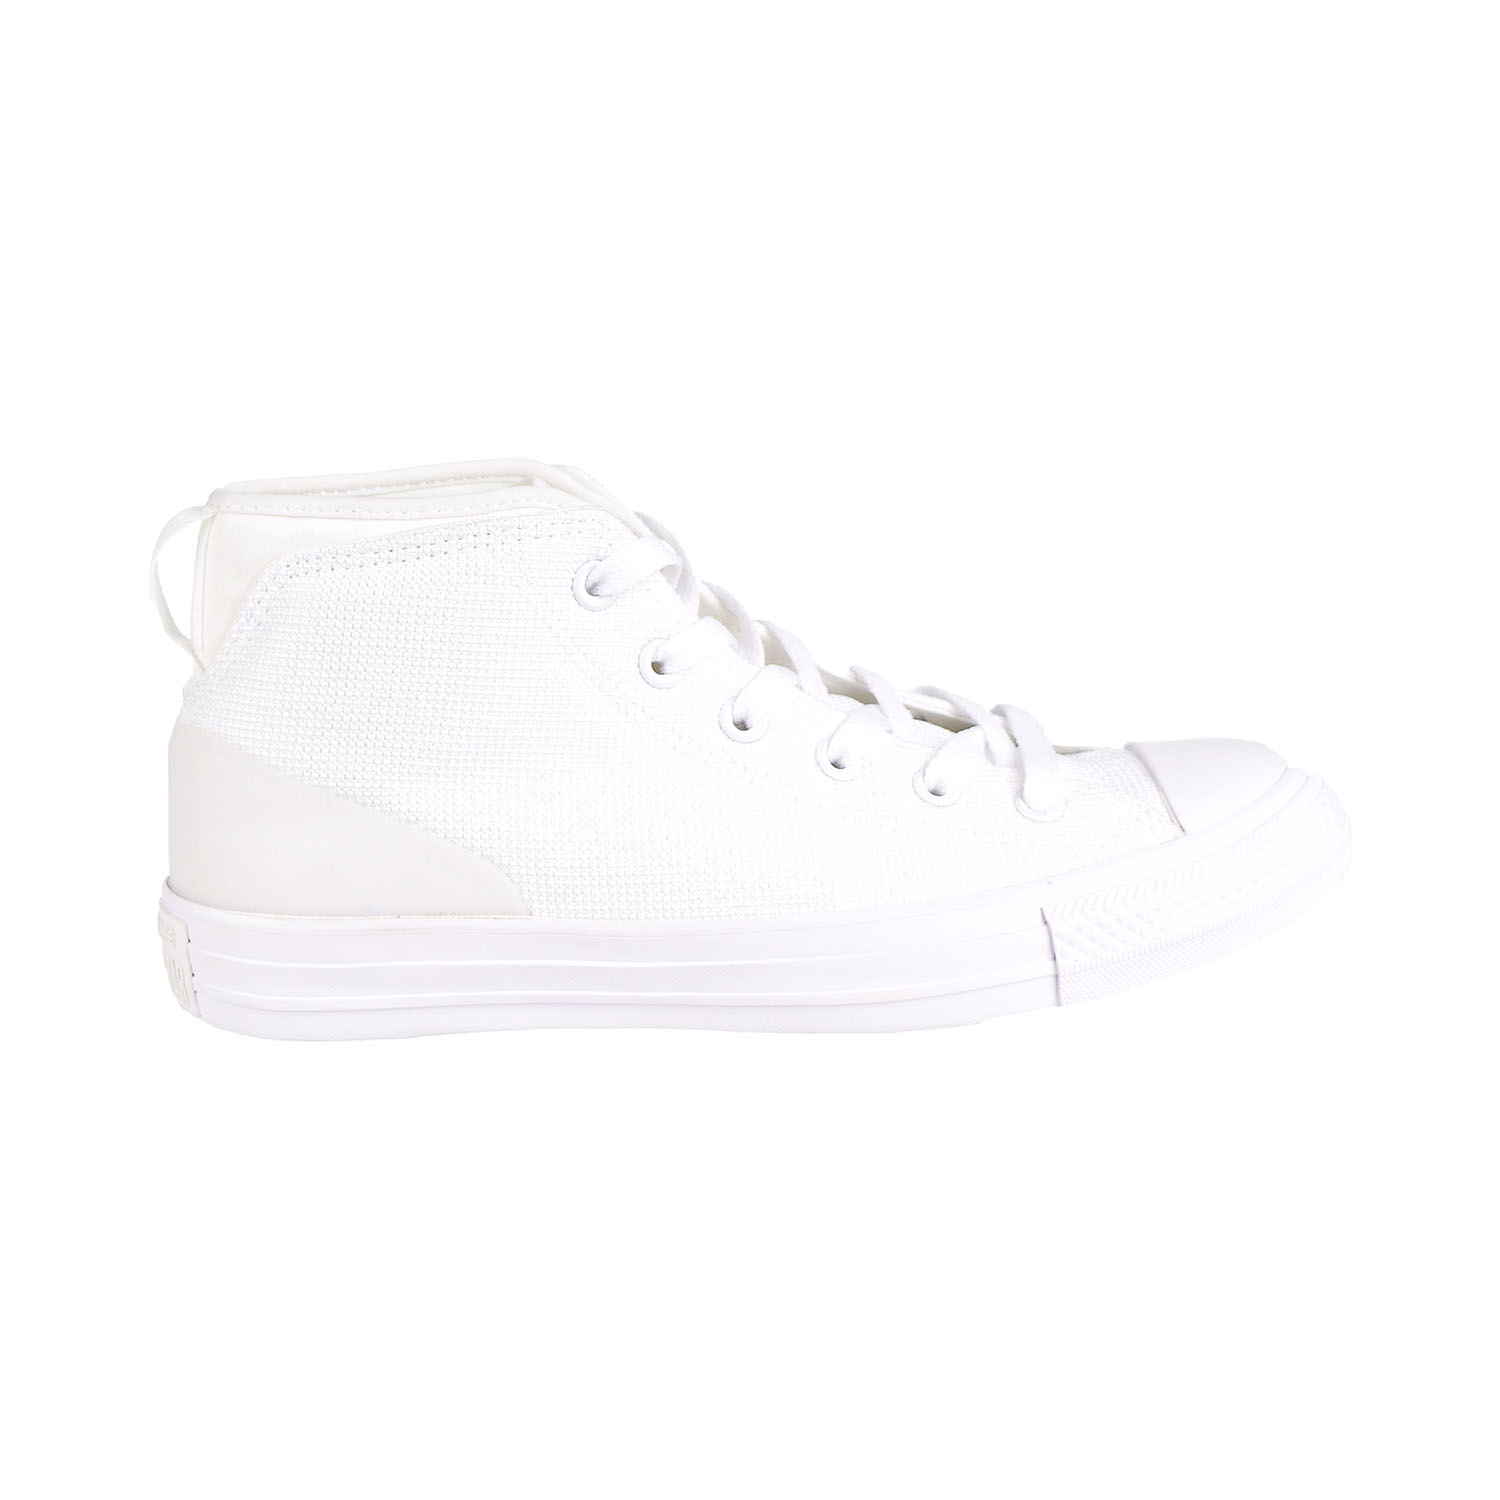 Converse Chuck Taylor All Star Syde Street Men's Shoes White-White 155490c - image 1 of 6